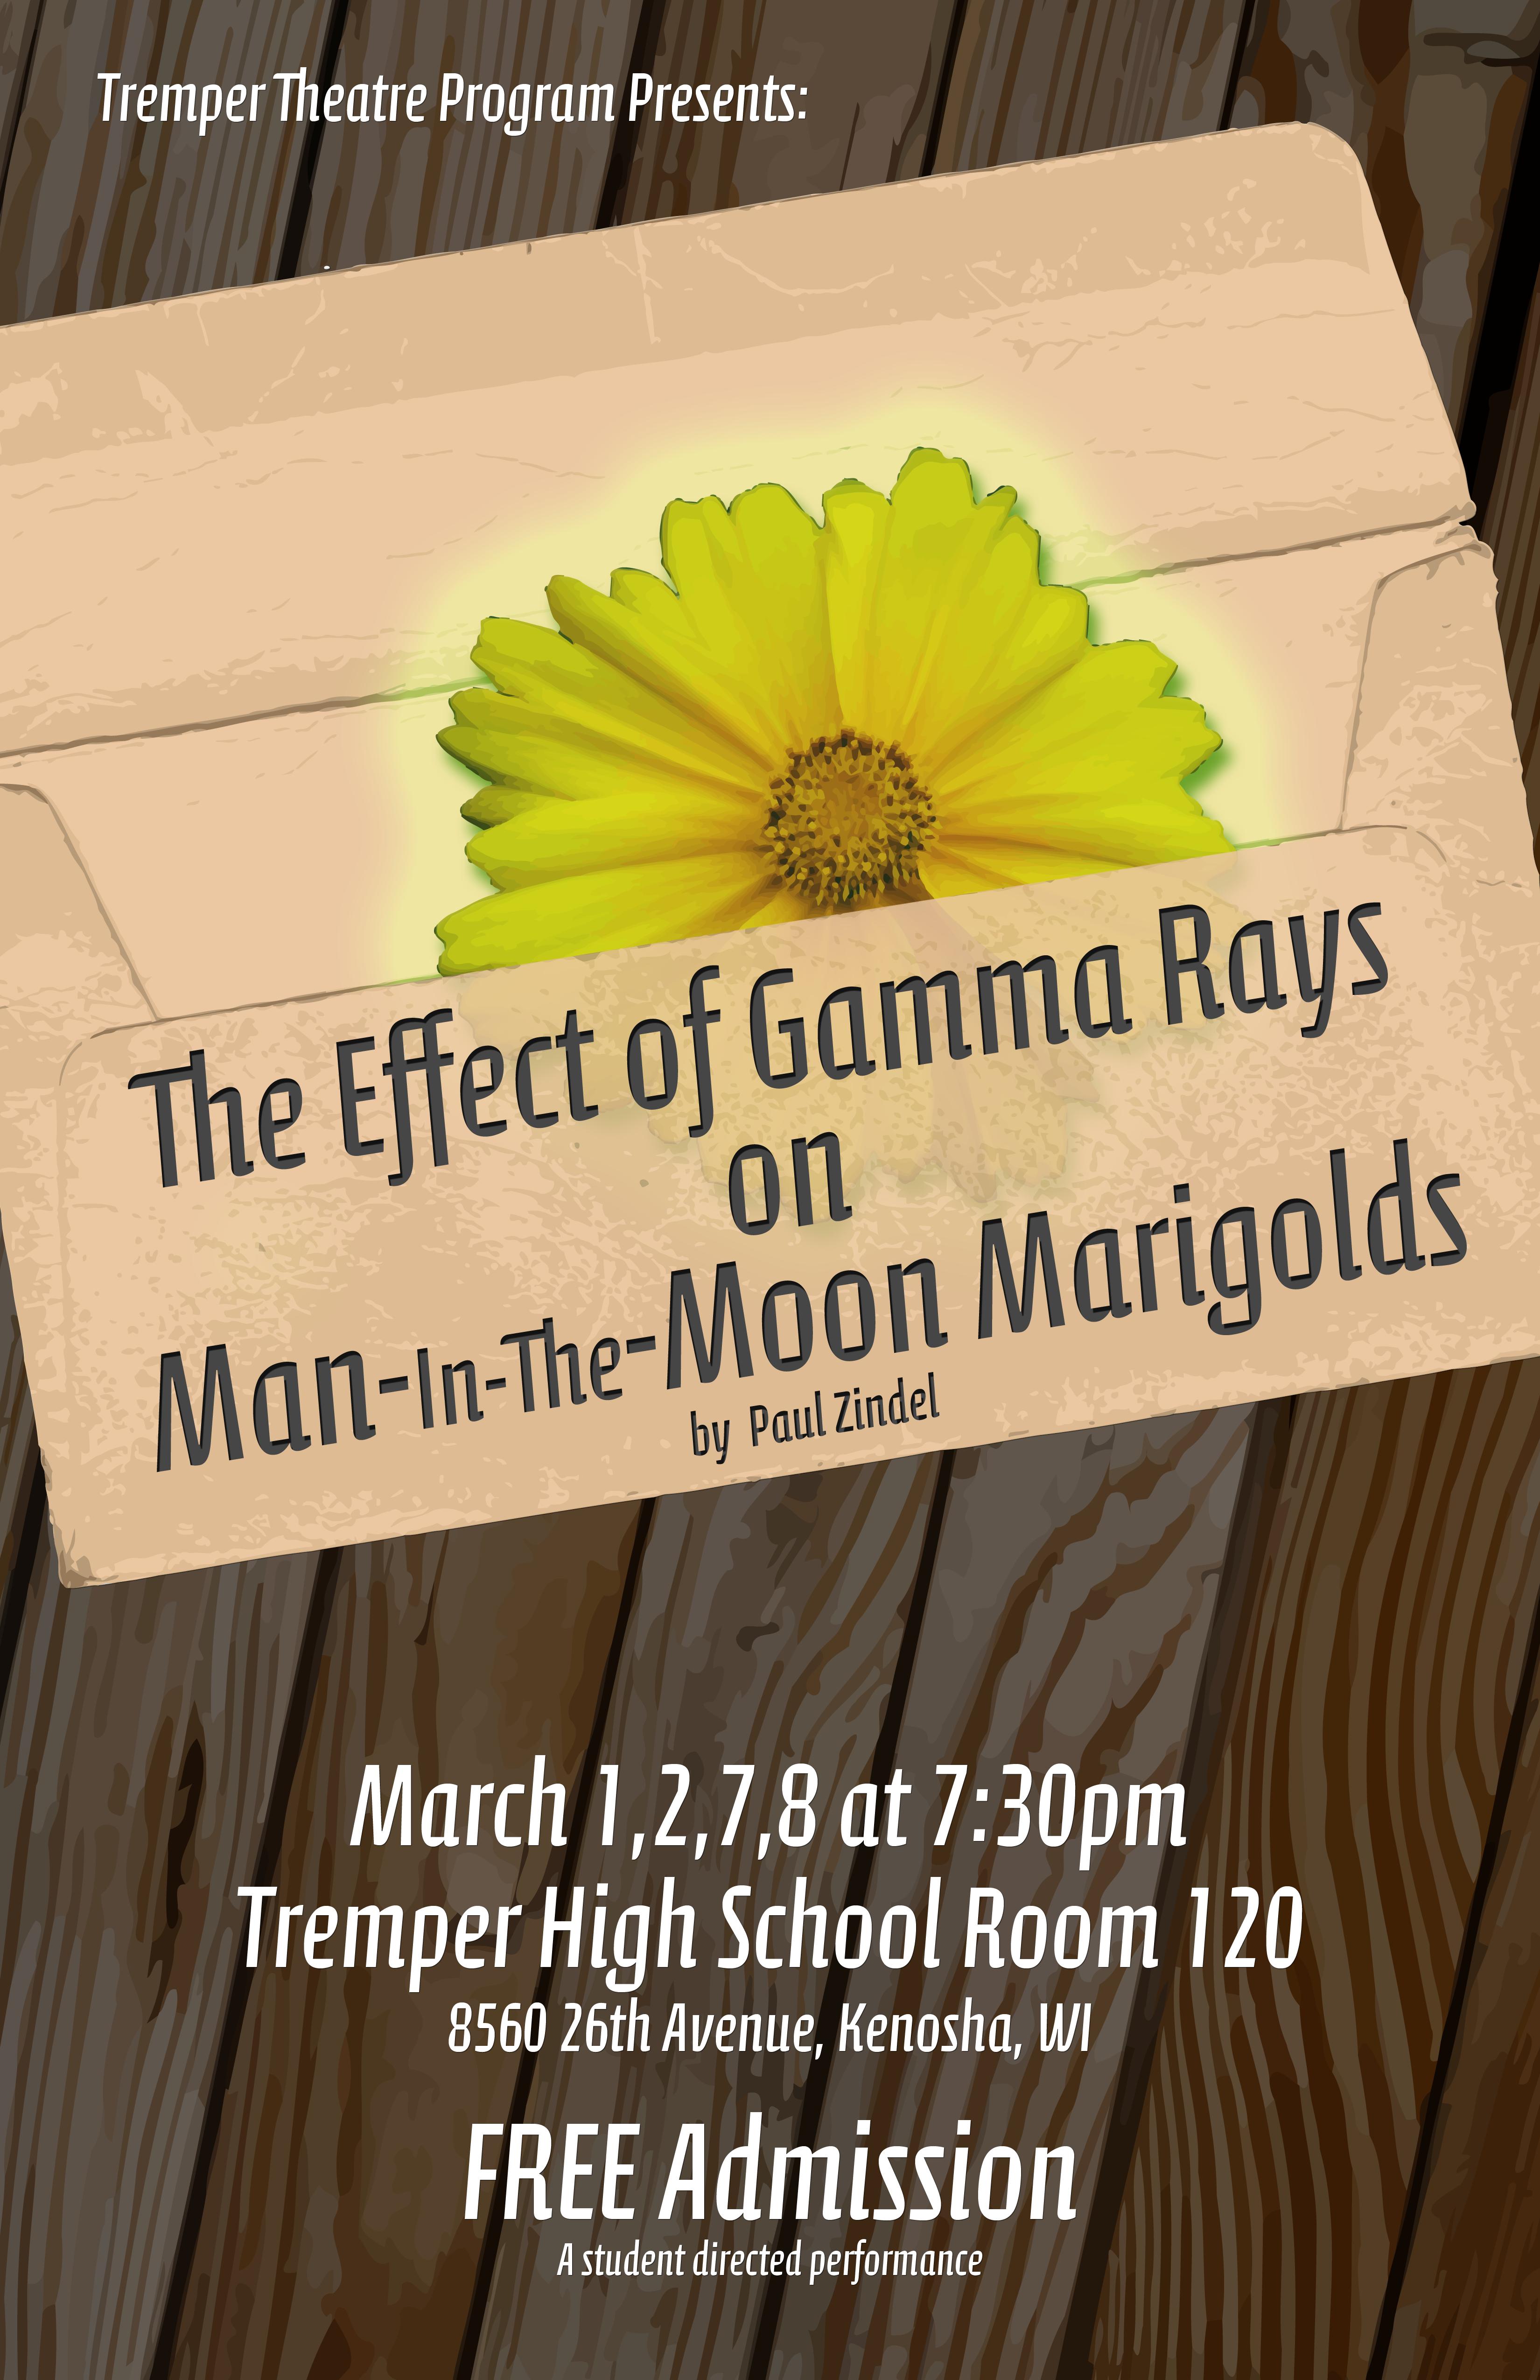 The poster for The Effect of Gamma Rays on Man-in-the-Moon Marigolds